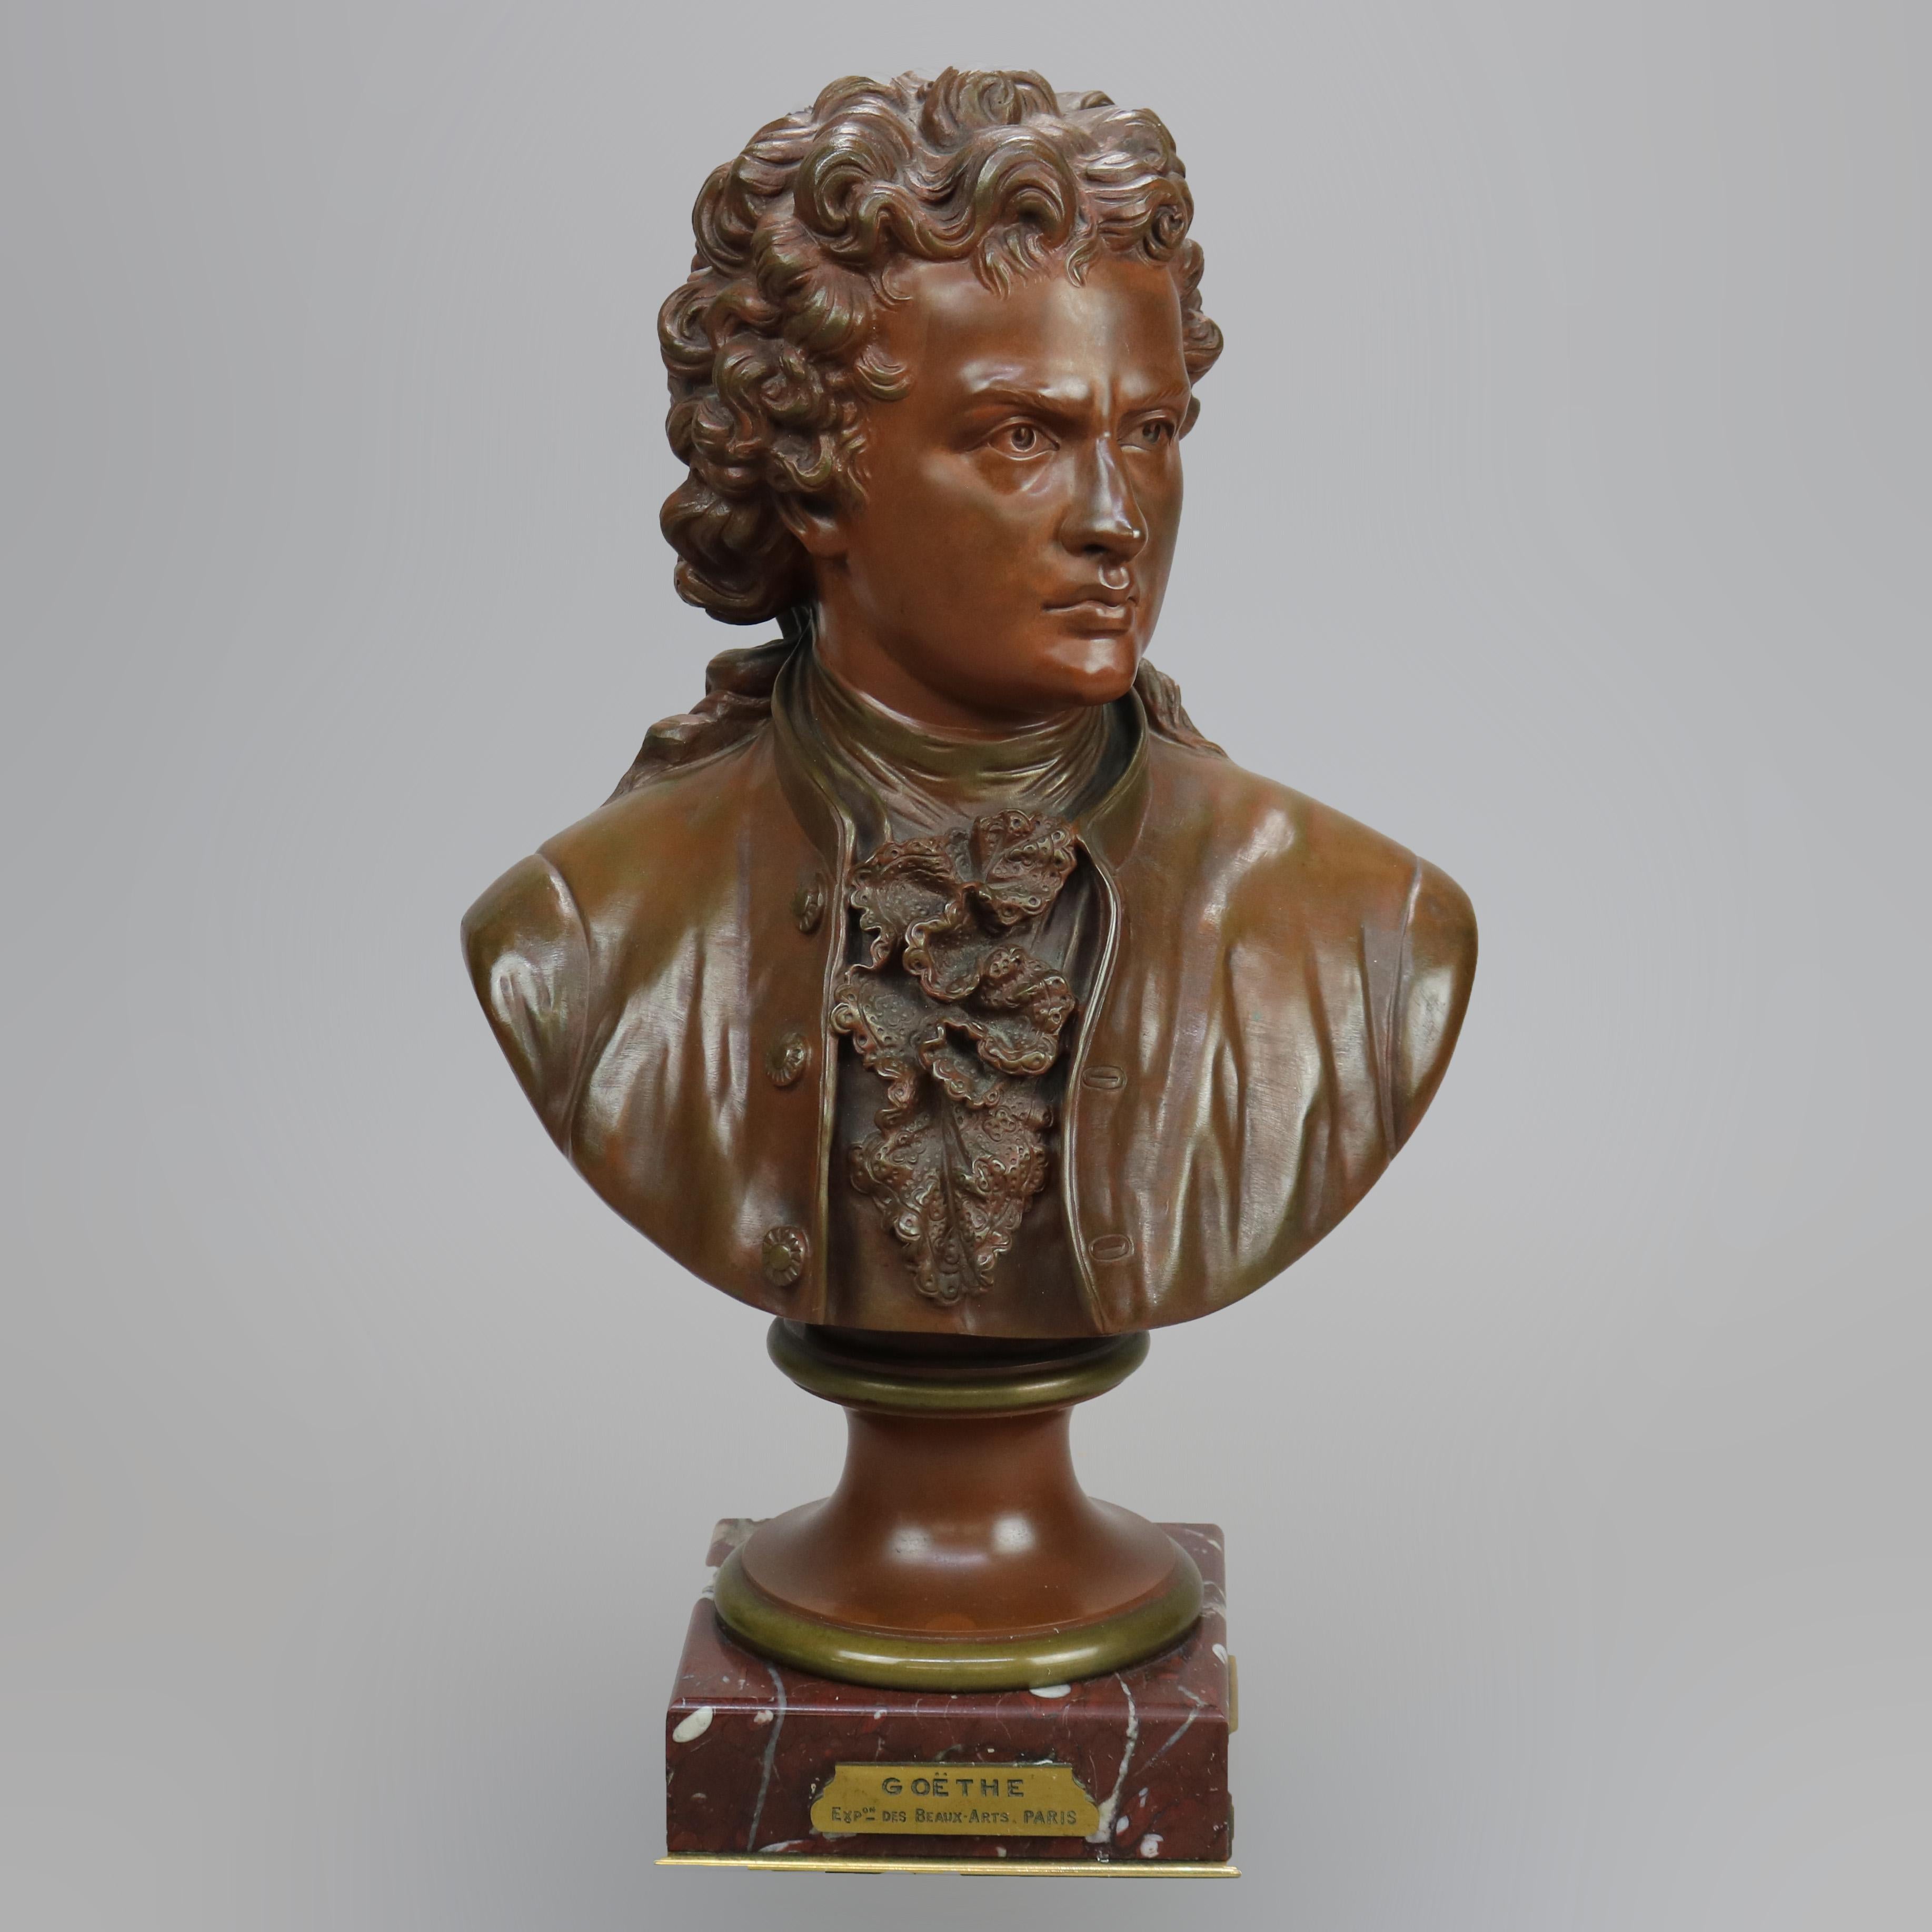 An antique French bust sculpture offers cast bronze portrait of Johann Wolfgang von Goethe seated on rouge marble base having identifying plaque 